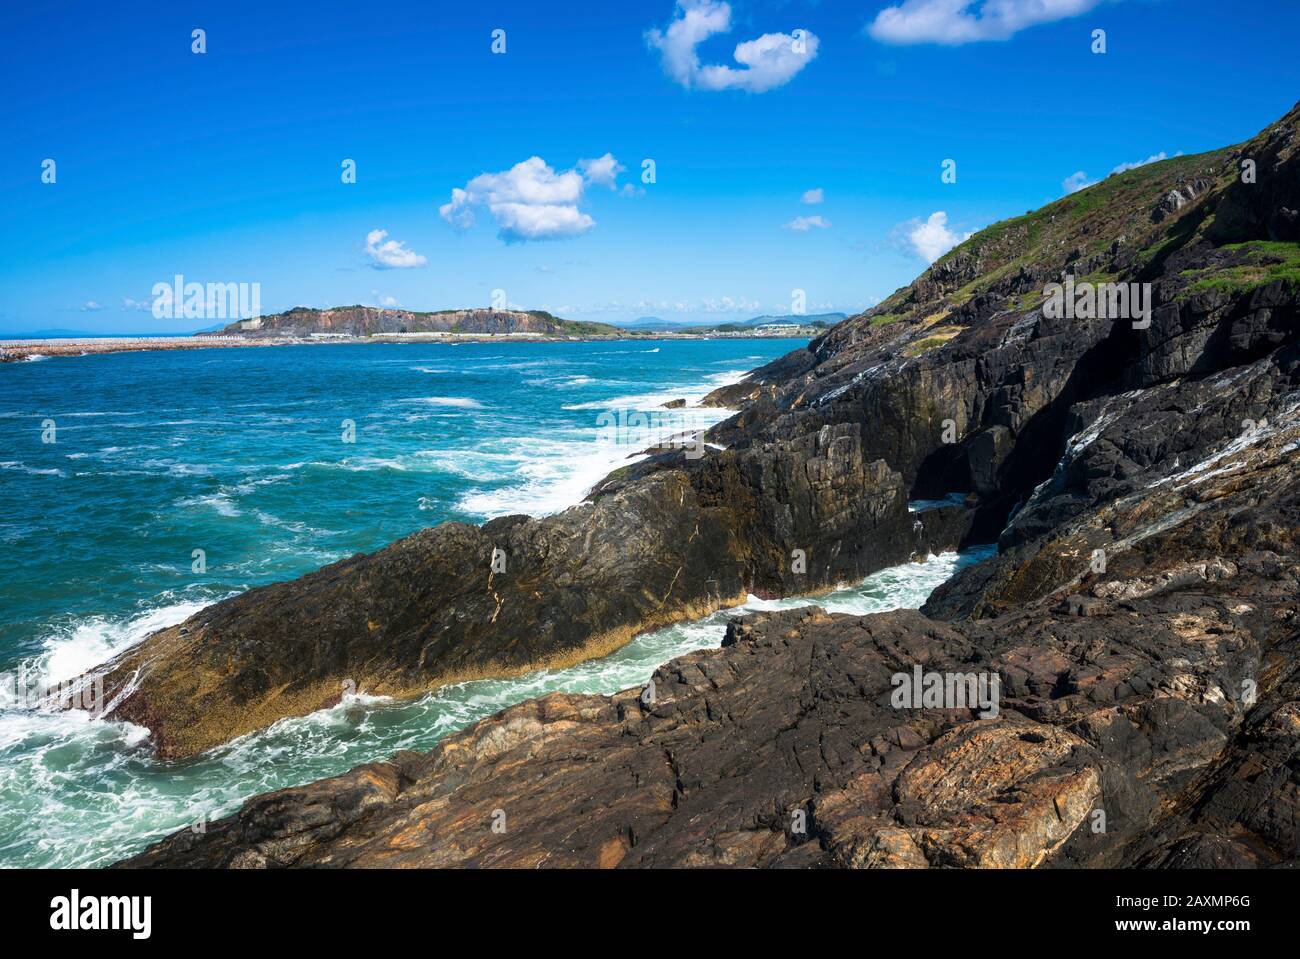 Muttonbird Island Nature Reserve at Coffs Harbour, New South Wales, Australia. Stock Photo